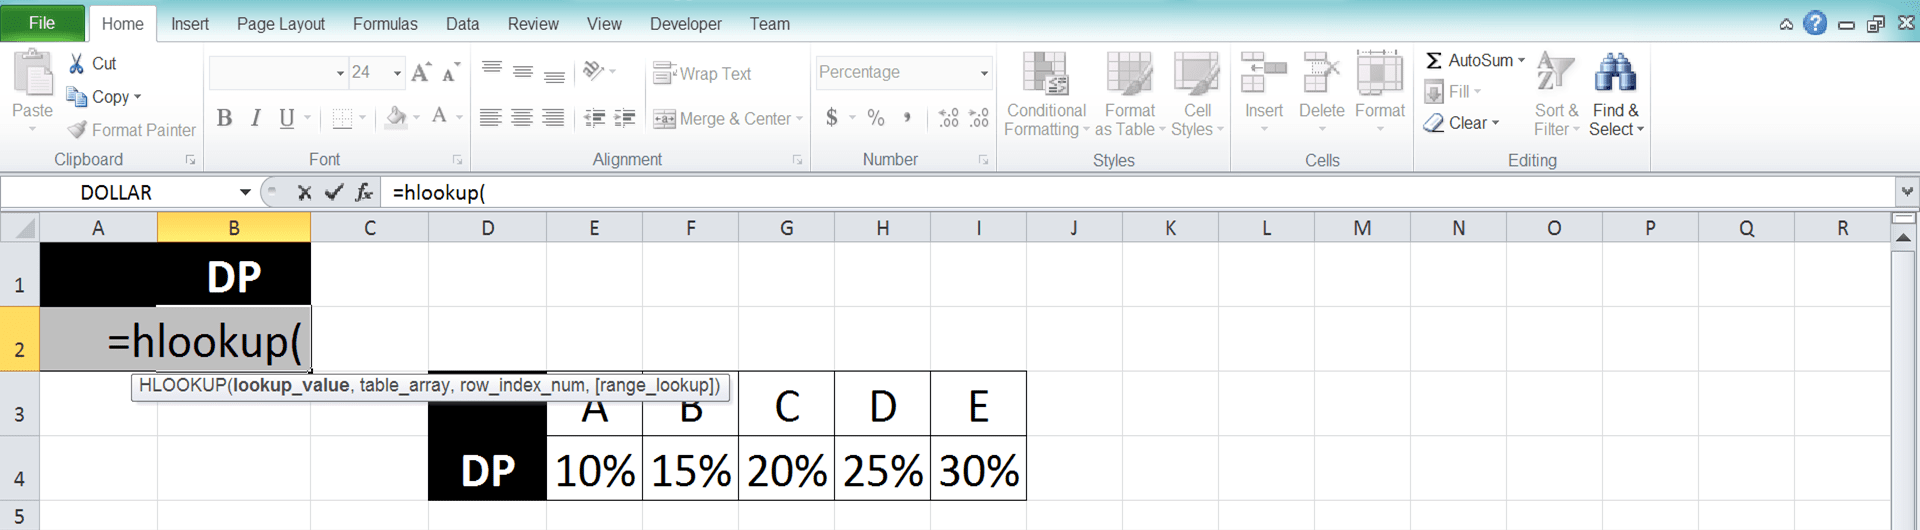 VLOOKUP and HLOOKUP in Excel: Functions, Examples, and How to Use - Screenshot of Step 2 (HLOOKUP)